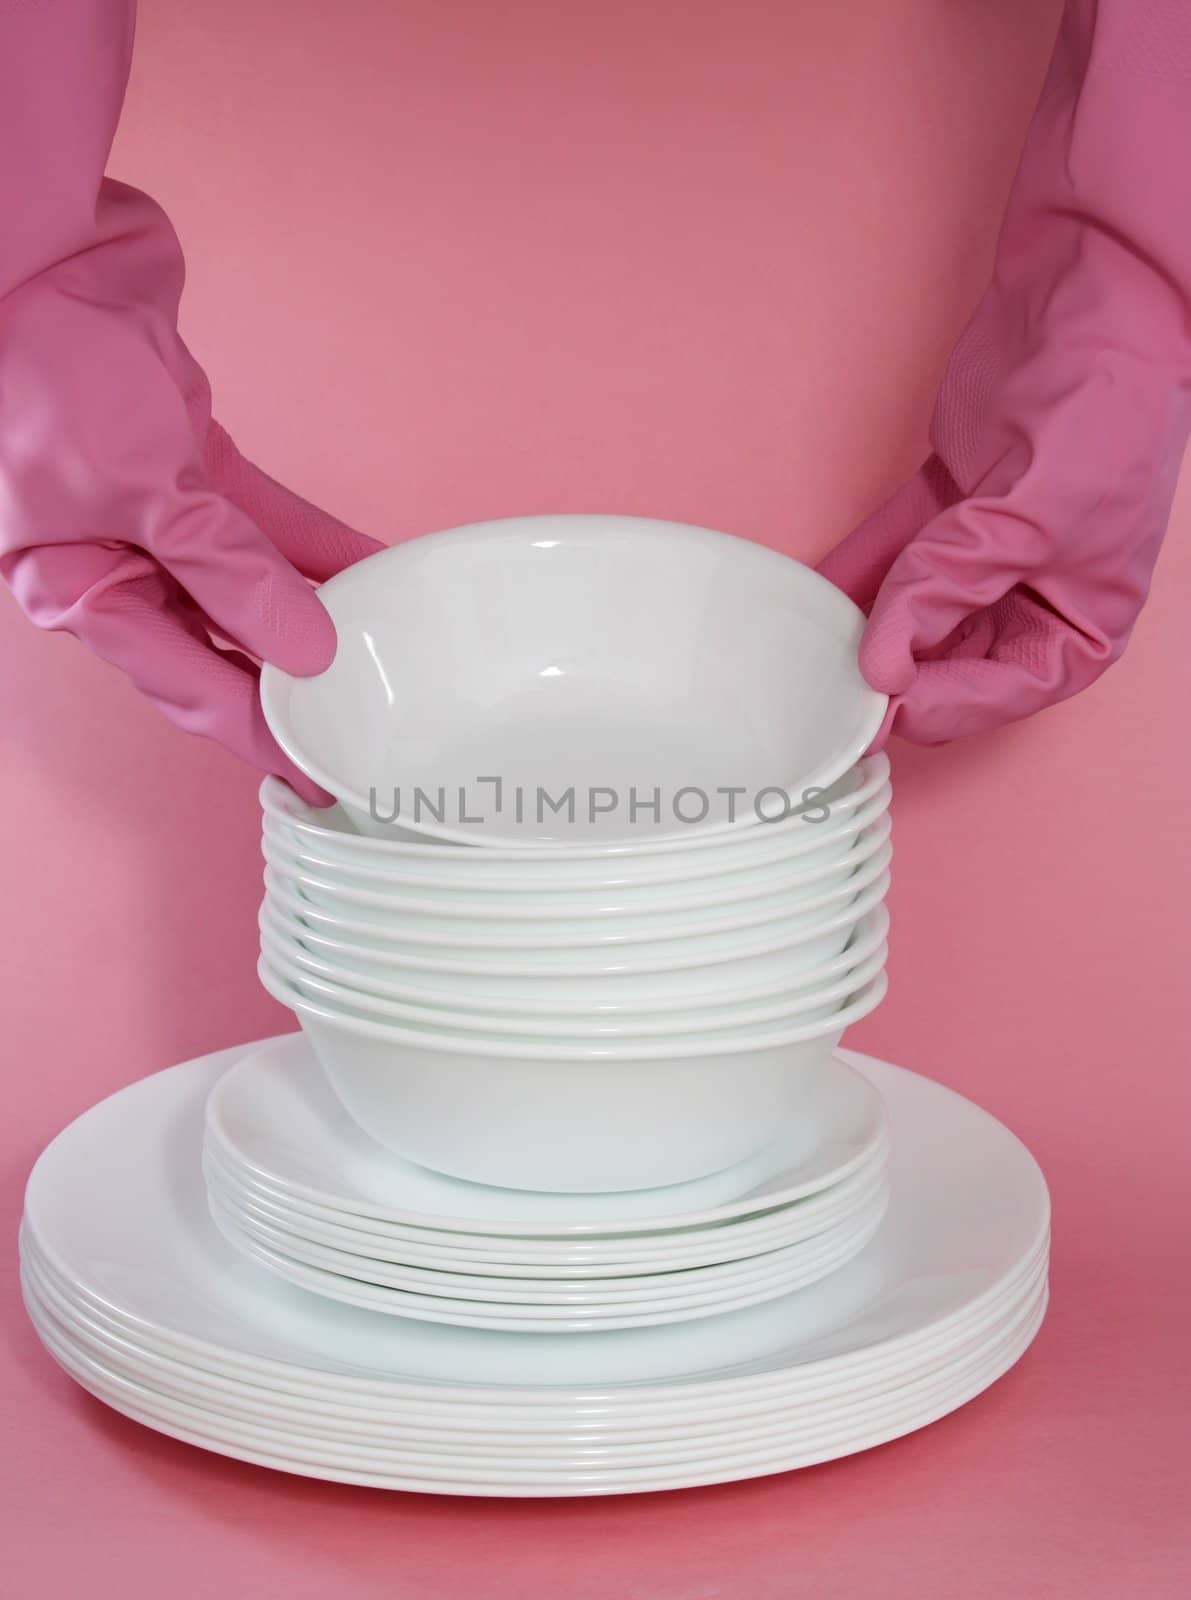 hand with pink glove holding white dishes